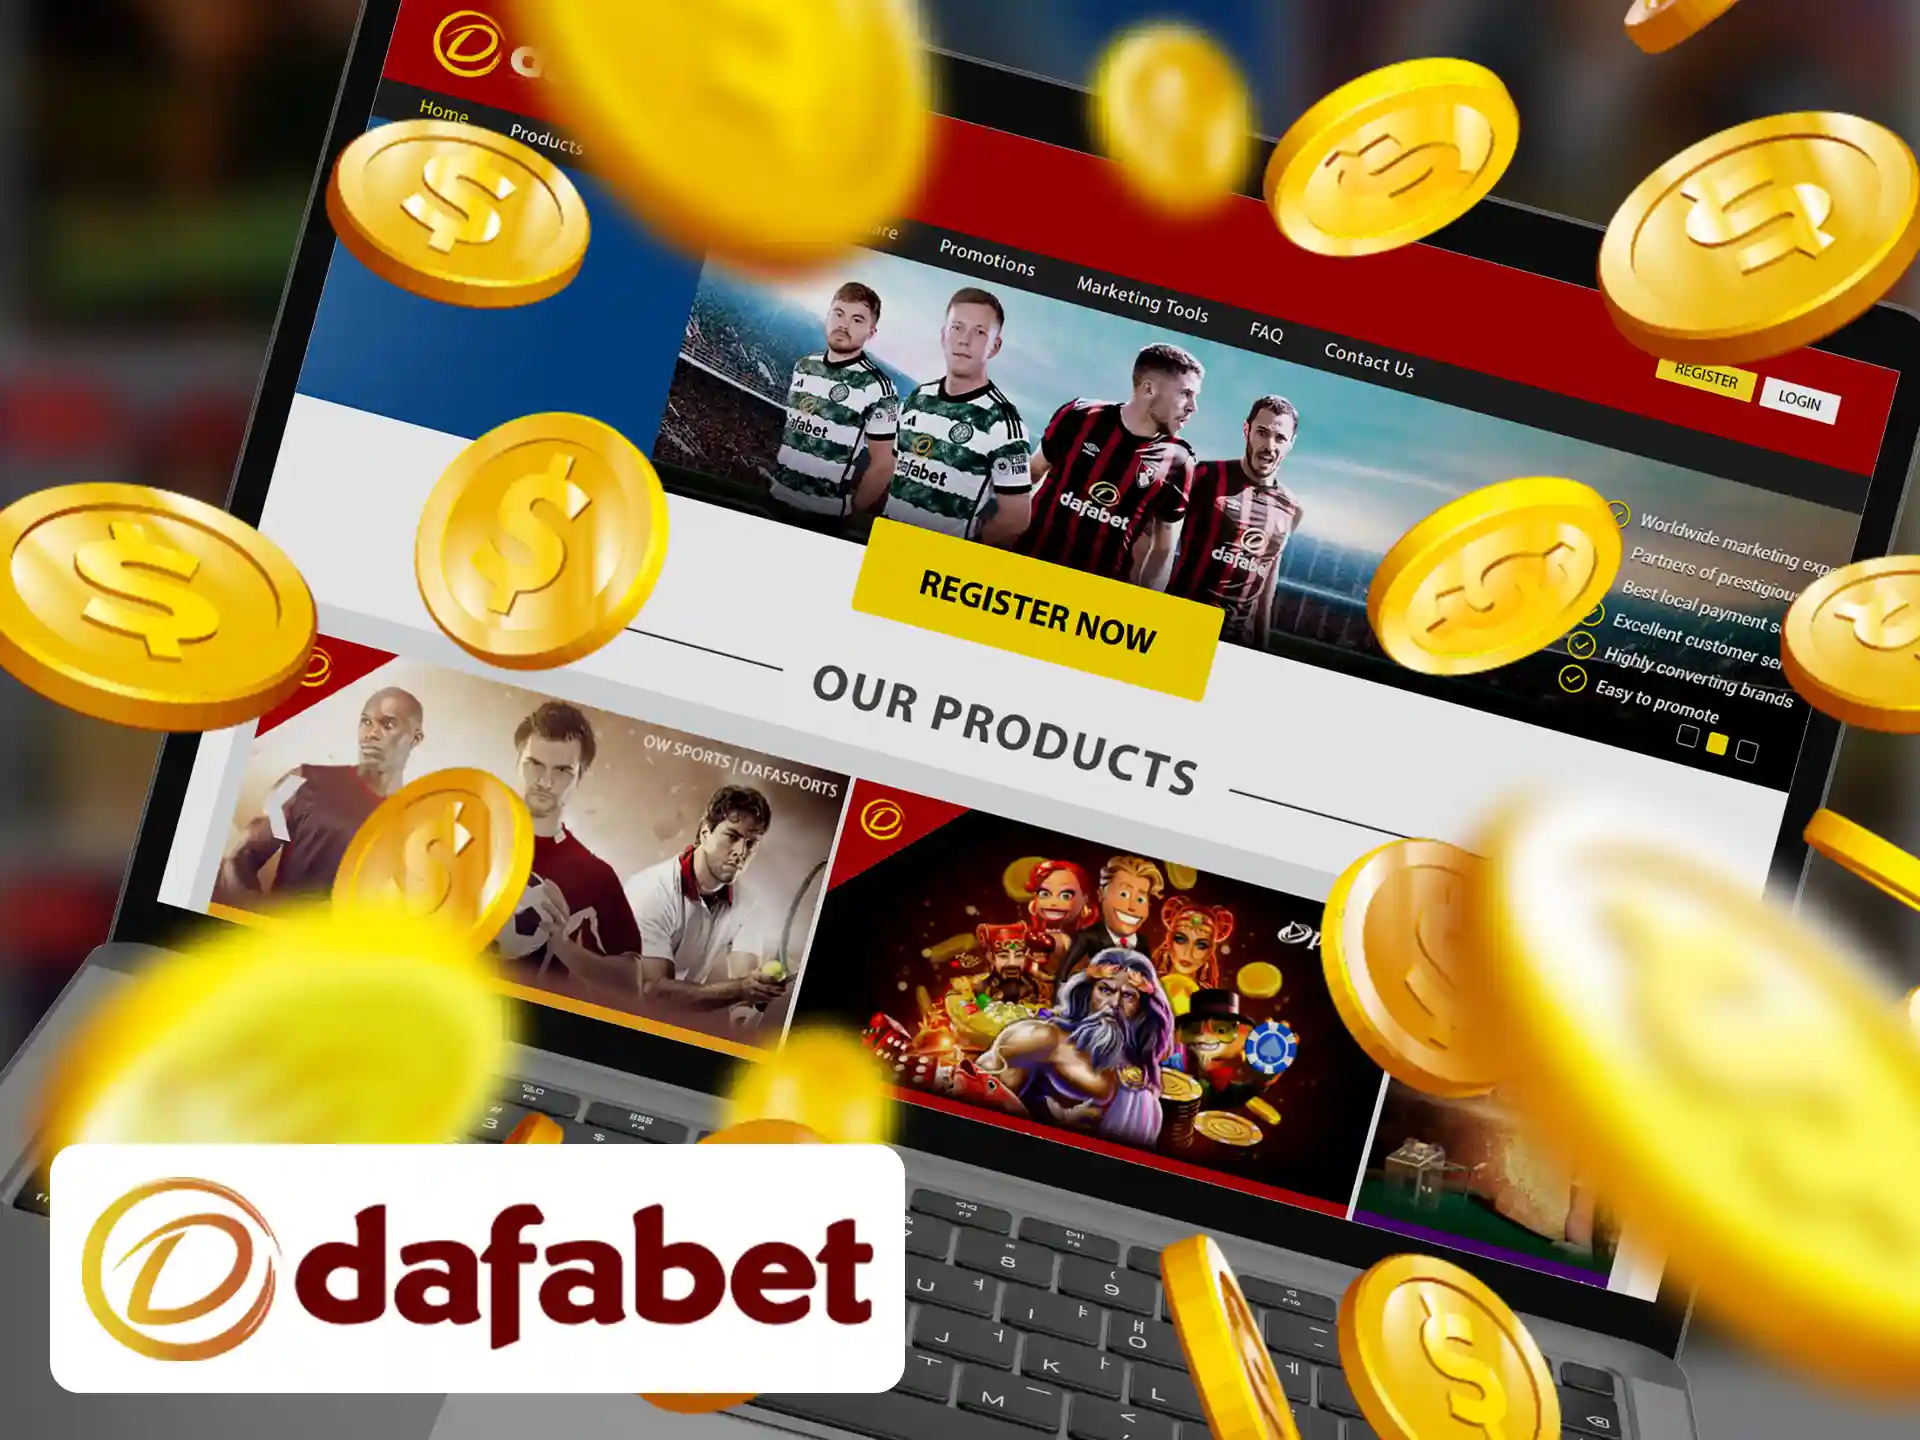 Join the Dafabet affiliate program and have an extra income online.